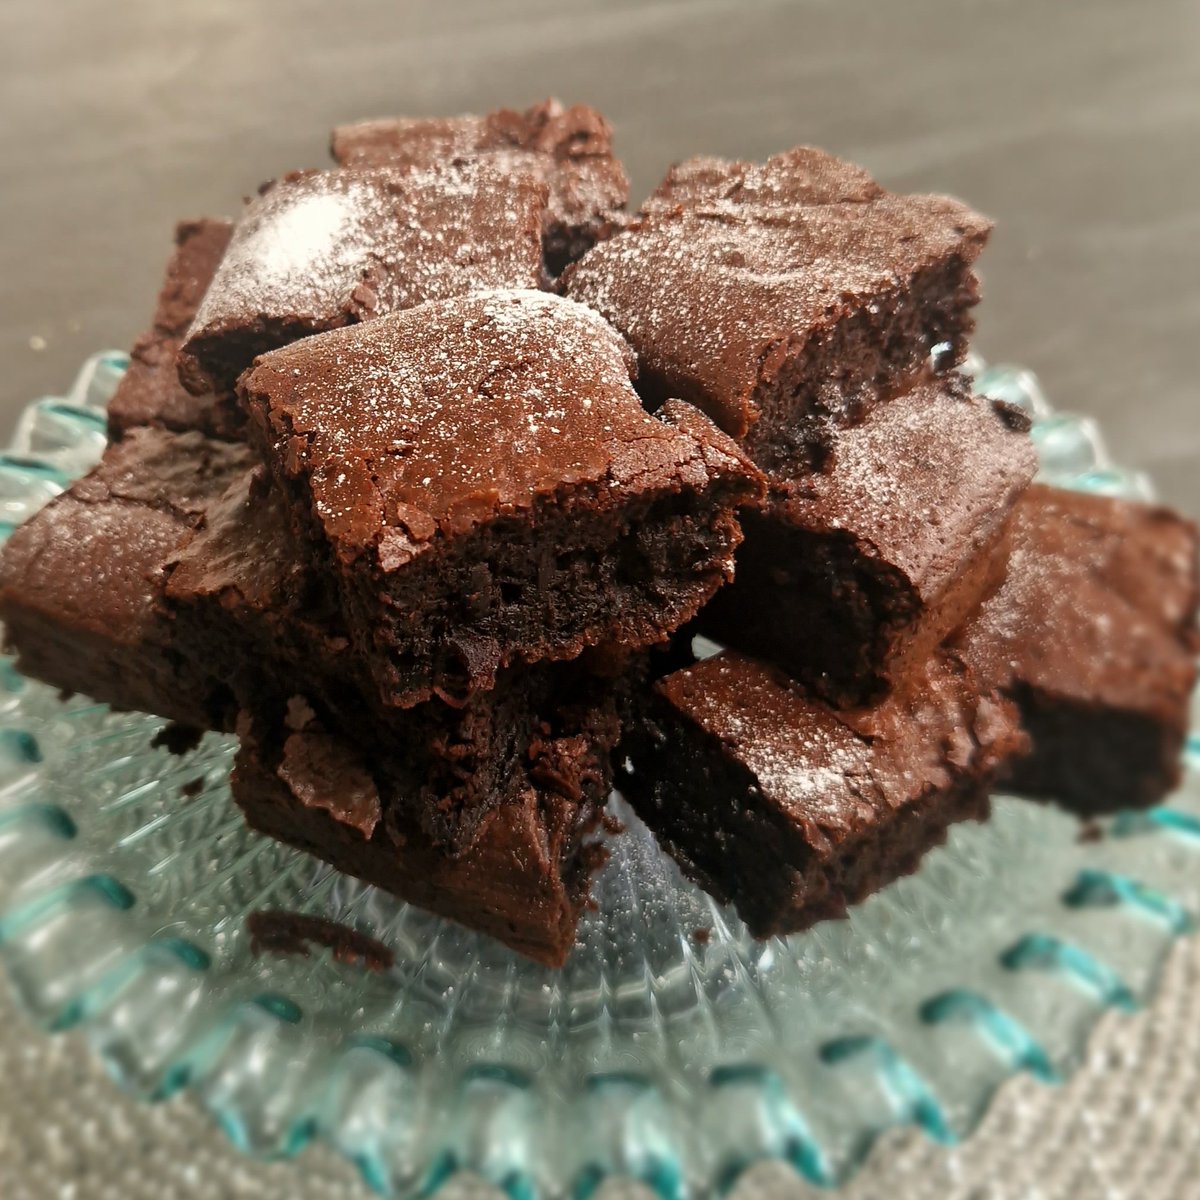 What do you do when you have a batch of beetroot fresh from the farm but kids that don't eat beets? 🤔 Make chocolate beetroot brownies, and best hope they don't realise what the secret ingredient is... I feel like this what they serve in the cafe at Schrute Farms 🤪